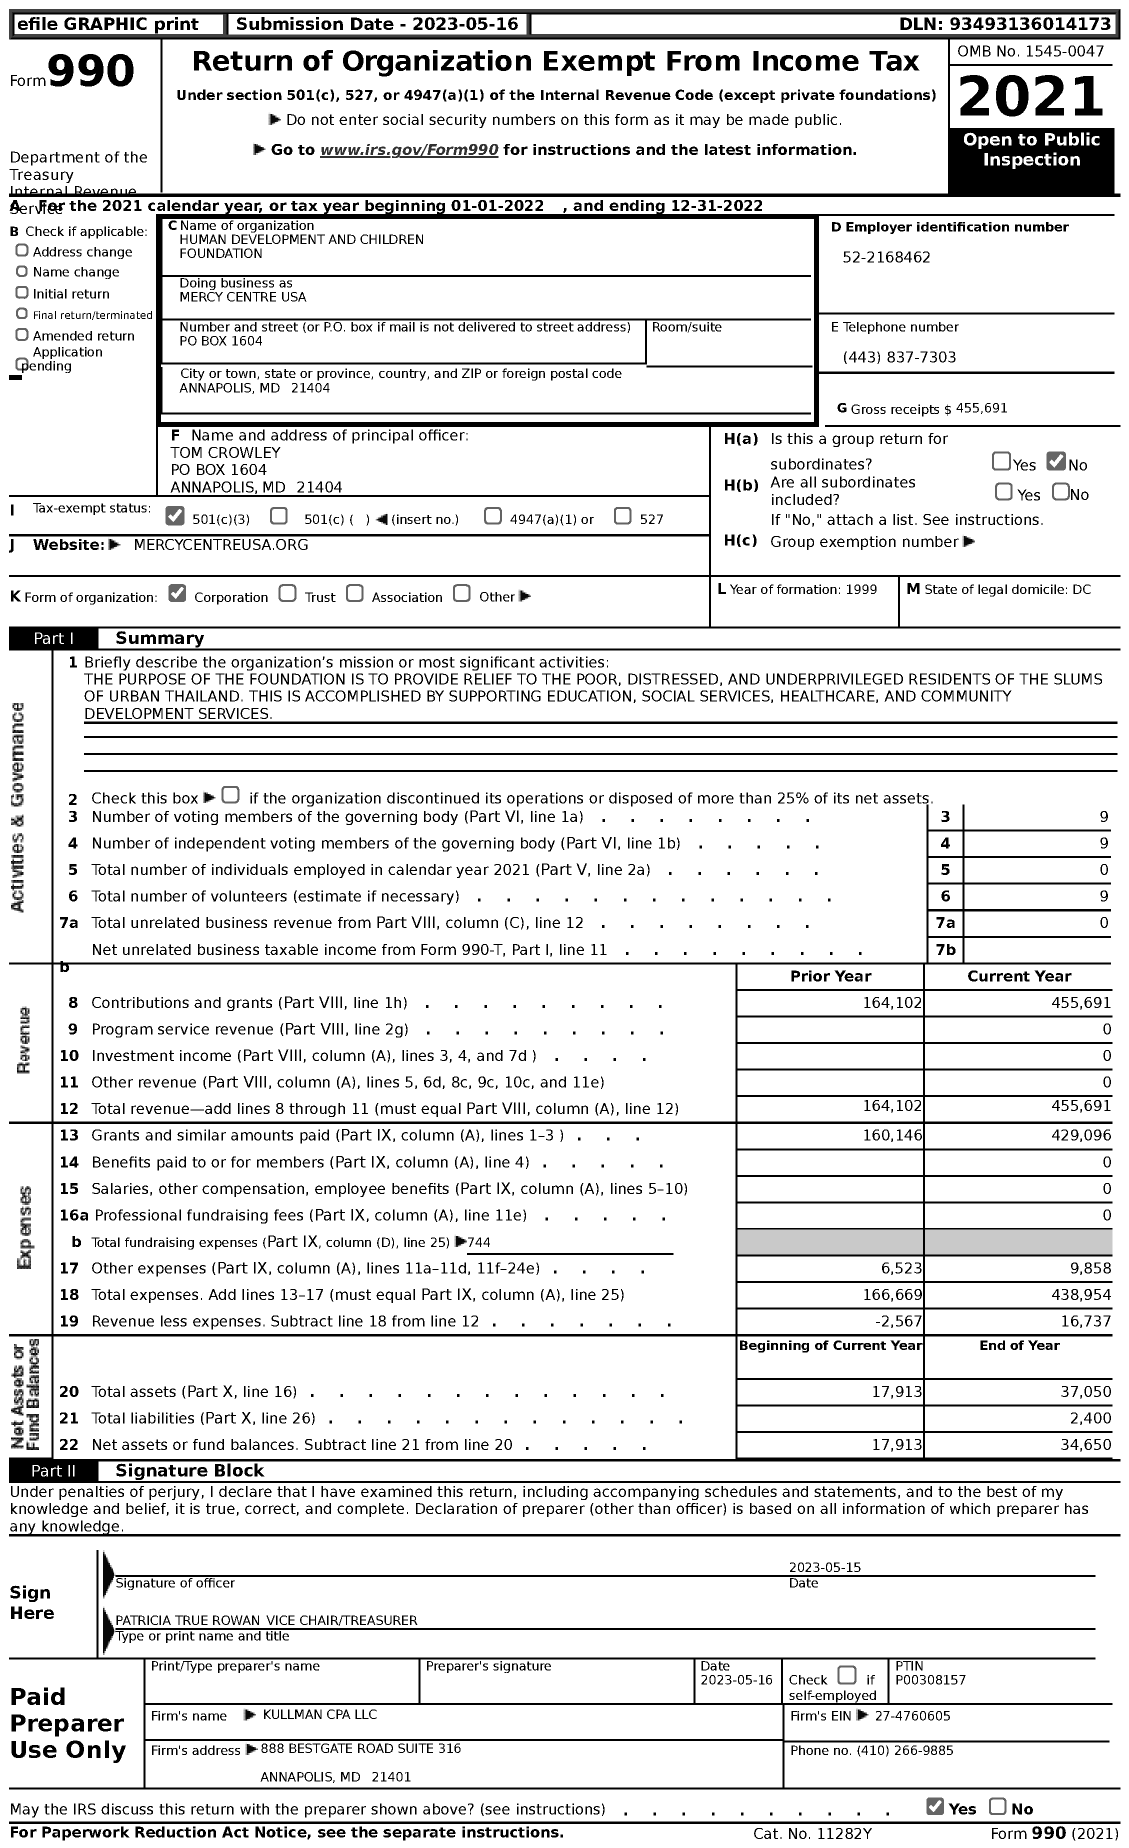 Image of first page of 2022 Form 990 for Mercy Centre USA